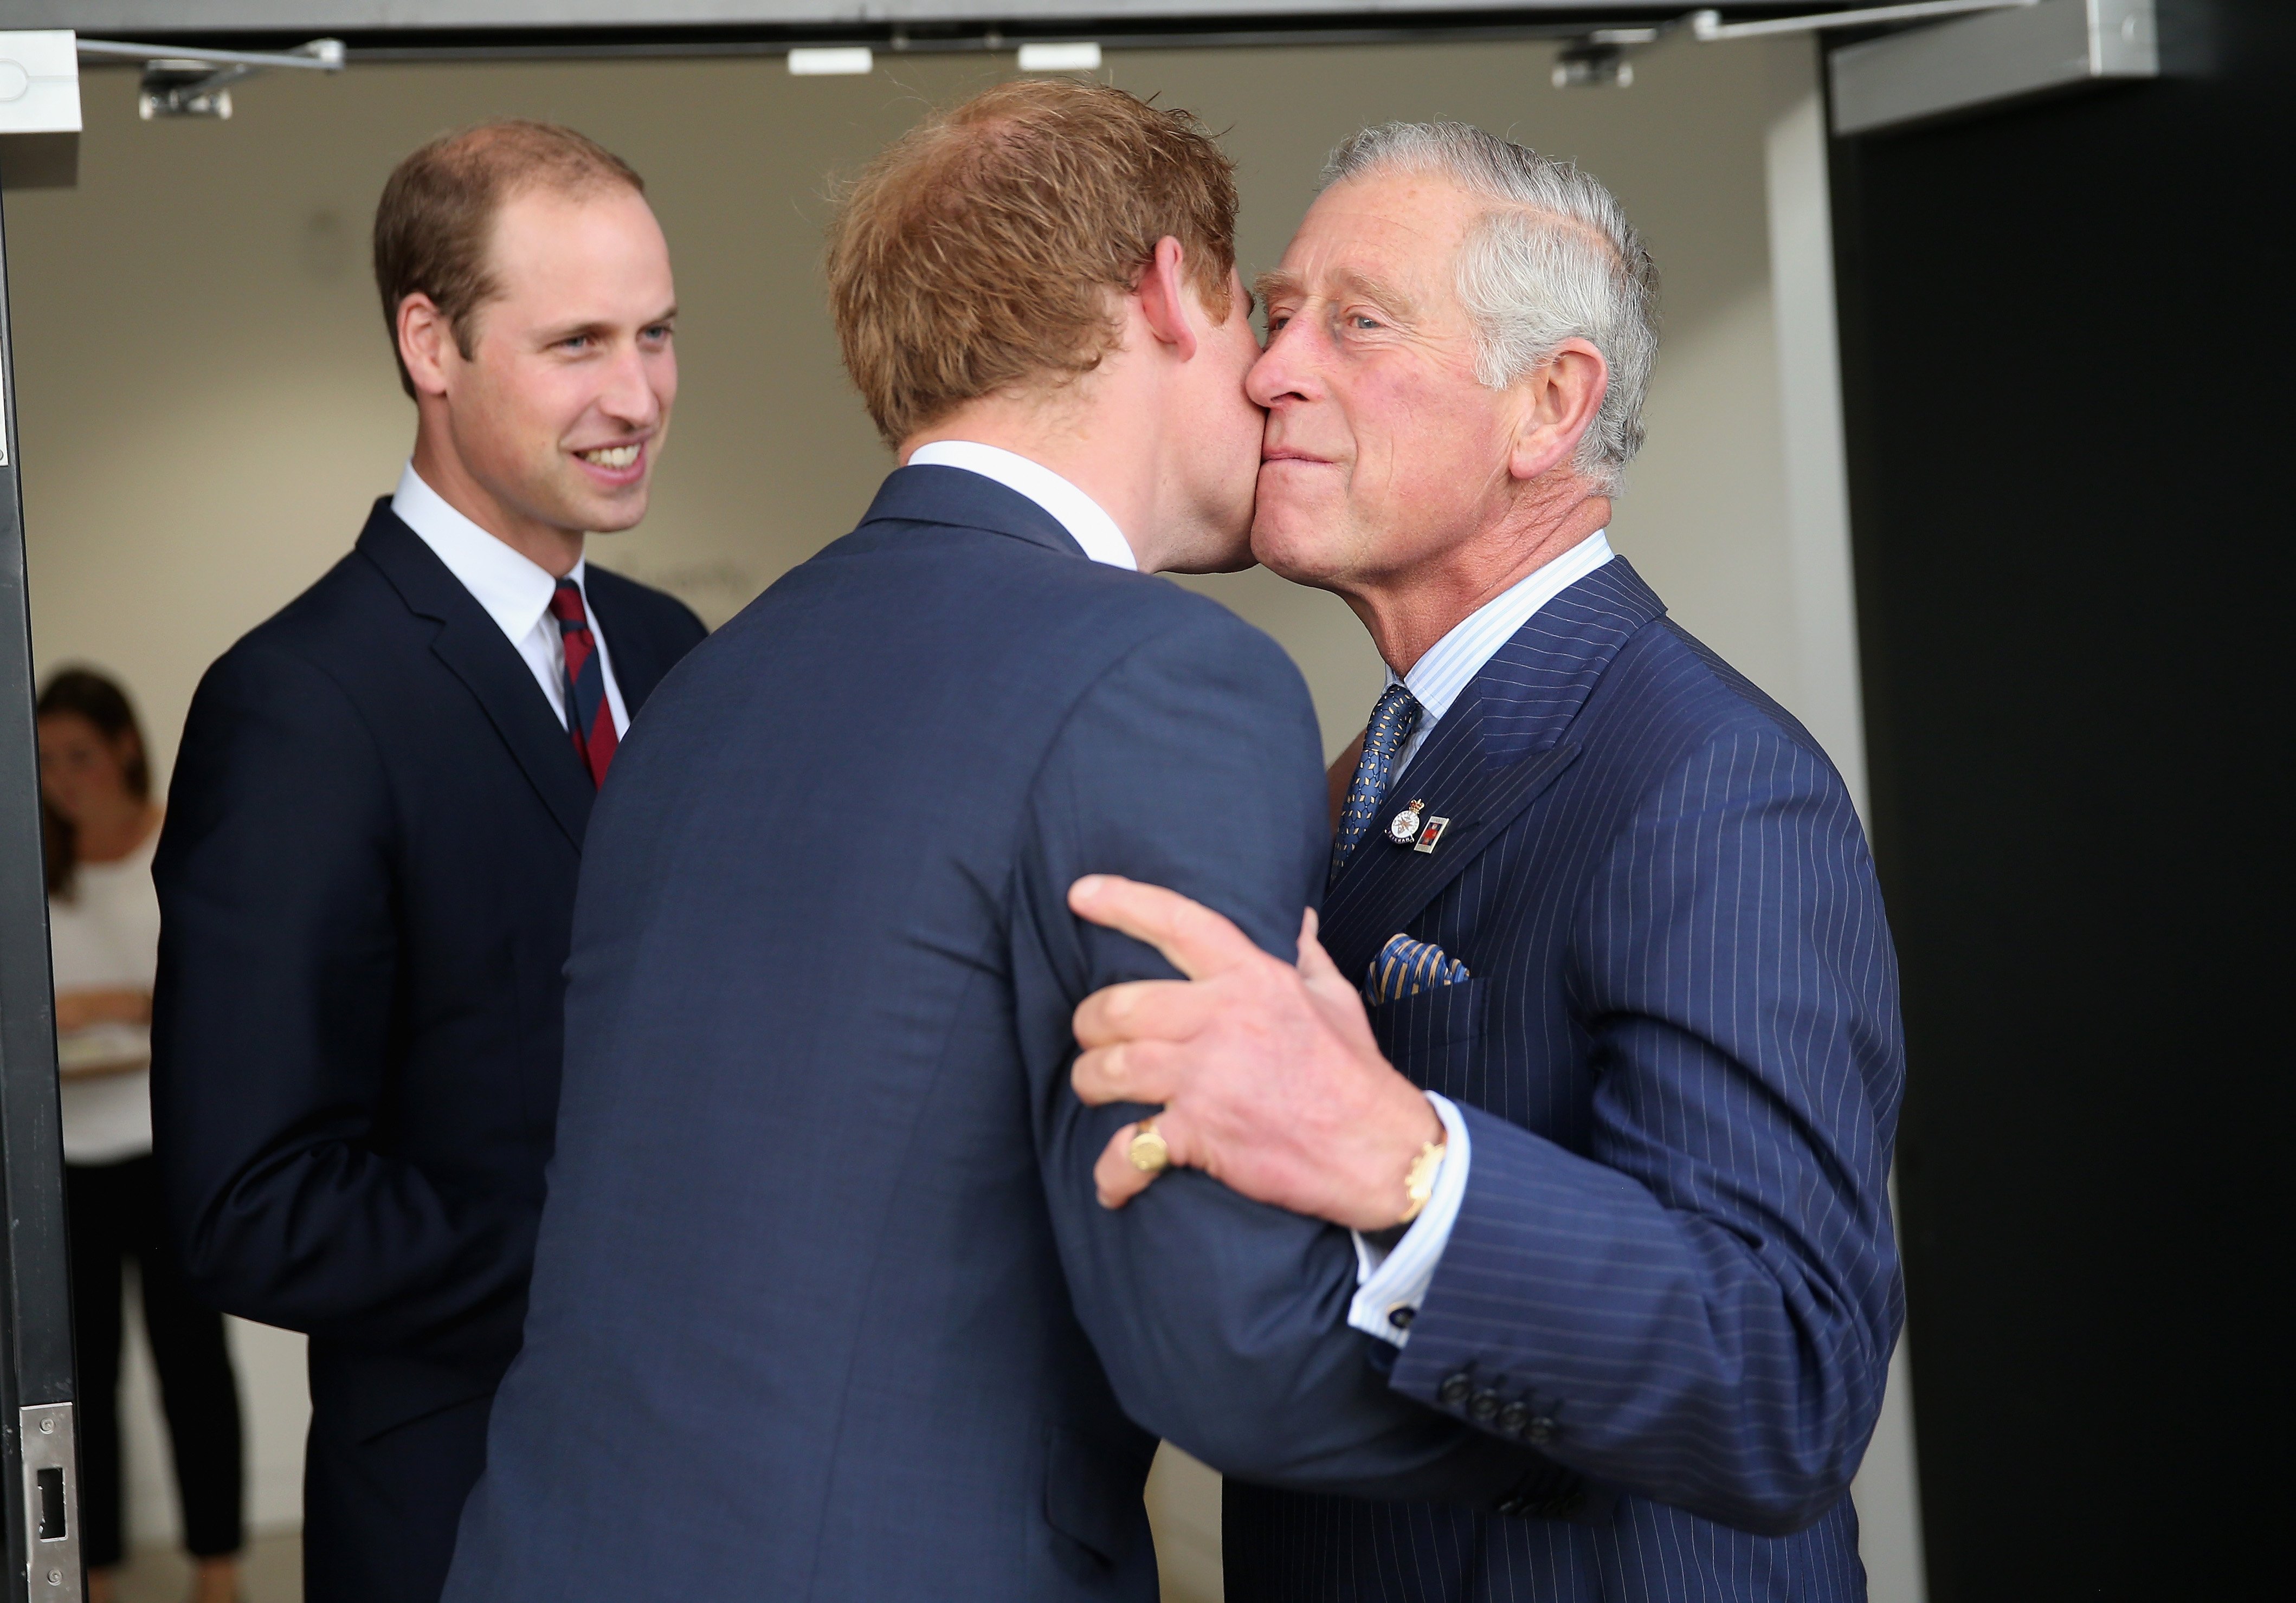 Prince Harry, Prince William and King Charles III in London 2013. | Source: Getty Images 